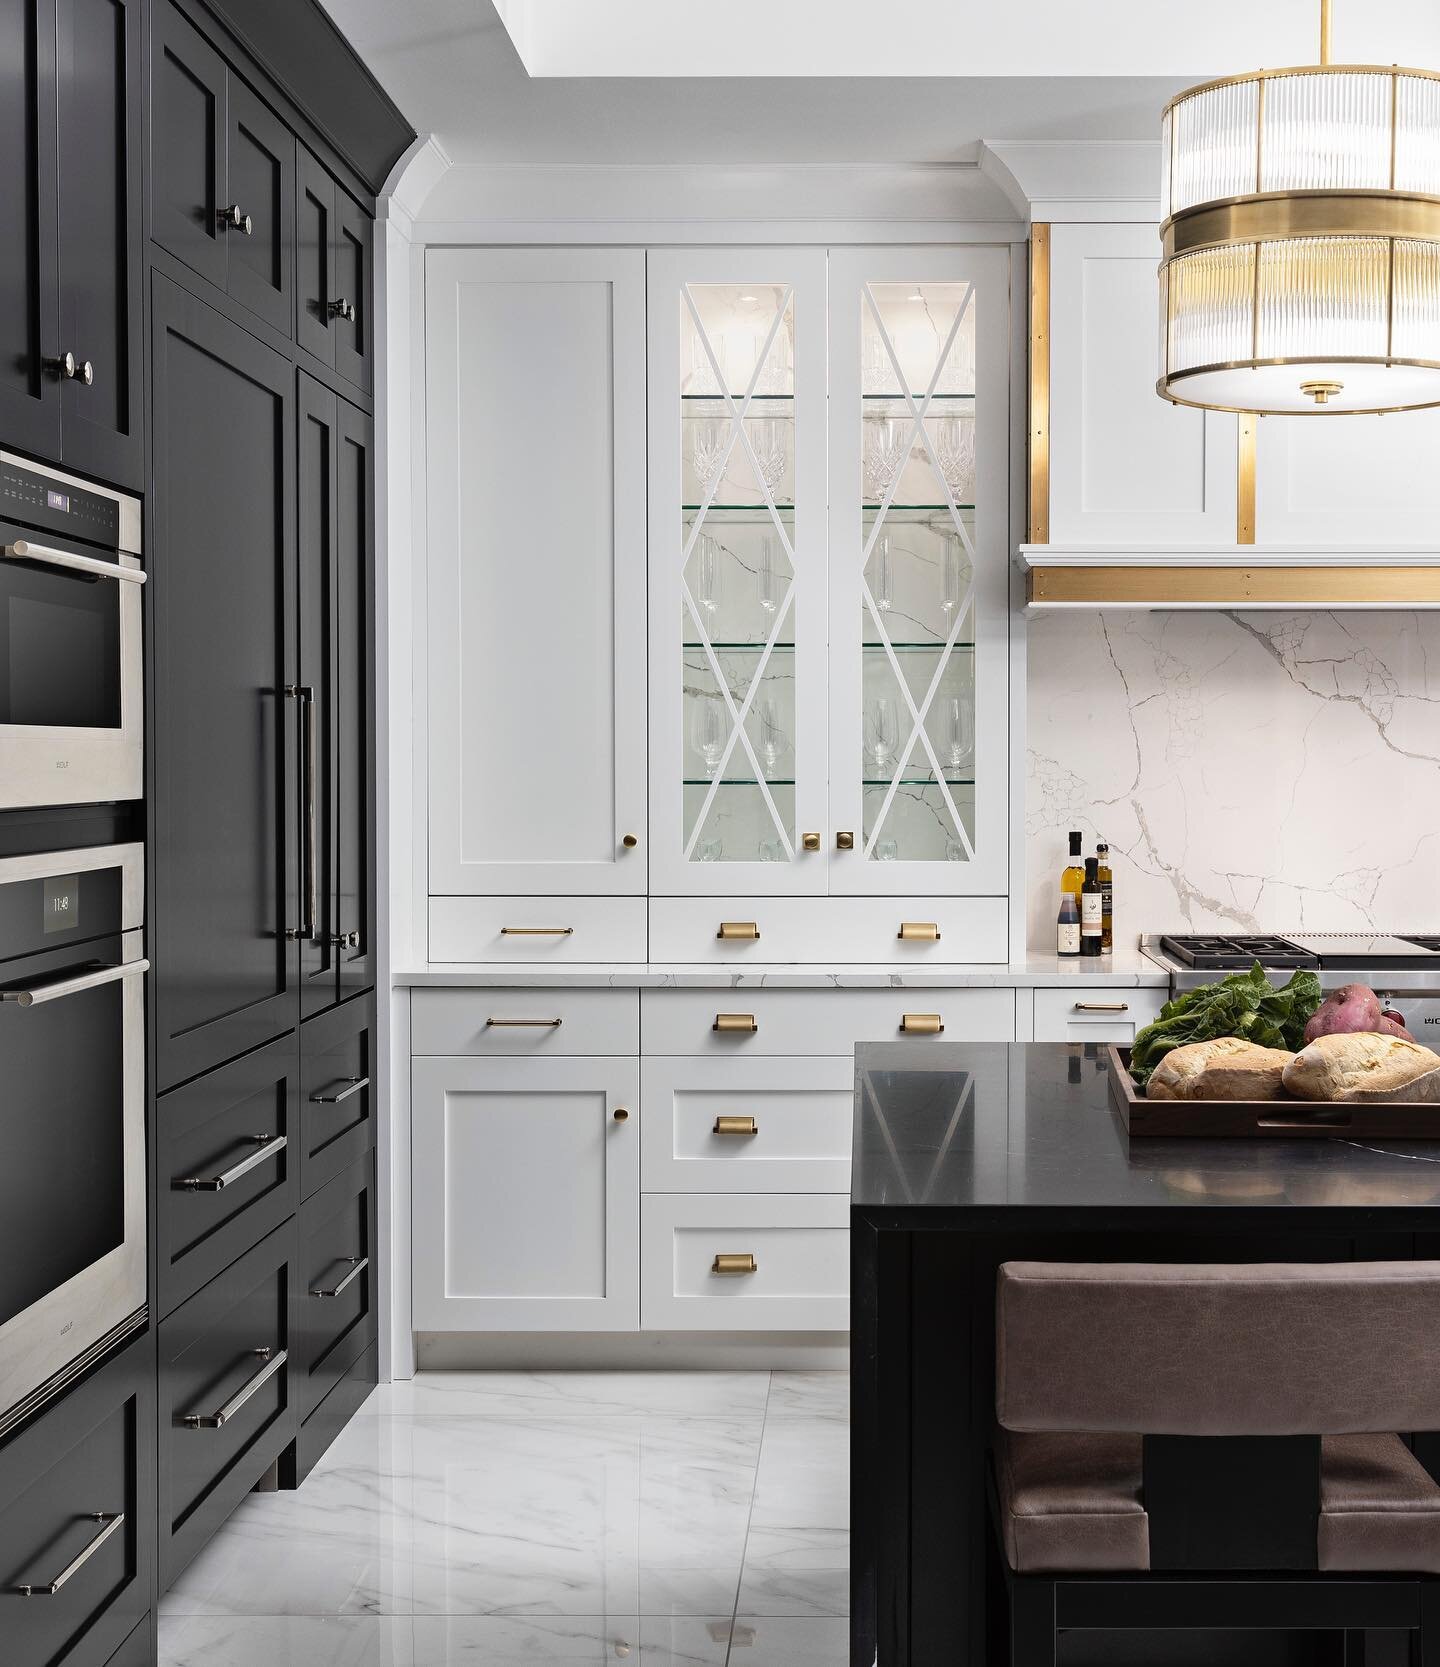 Custom kitchen cabinetry, dramatic accents, and running countertop material inside cabinetry are just a few of the highlights in this kitchen. 
Design: @meriendakadesigngroup 

&bull;
&bull;
&bull;

#modernluxuryinteriors #luxury #luxuryhomes #transi